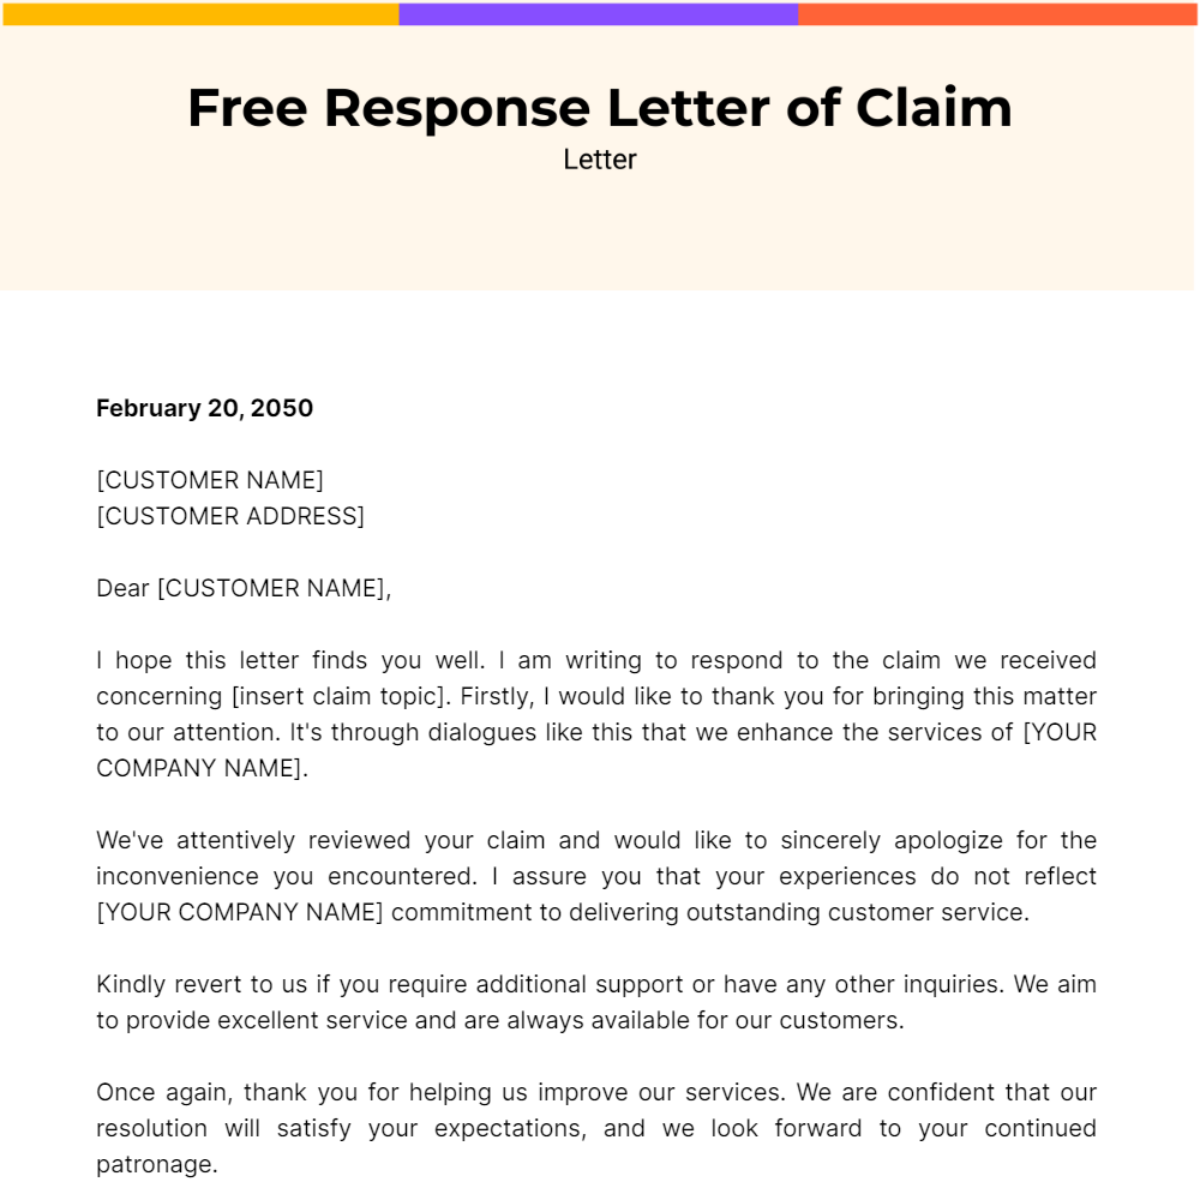 Free Response Letter of Claim